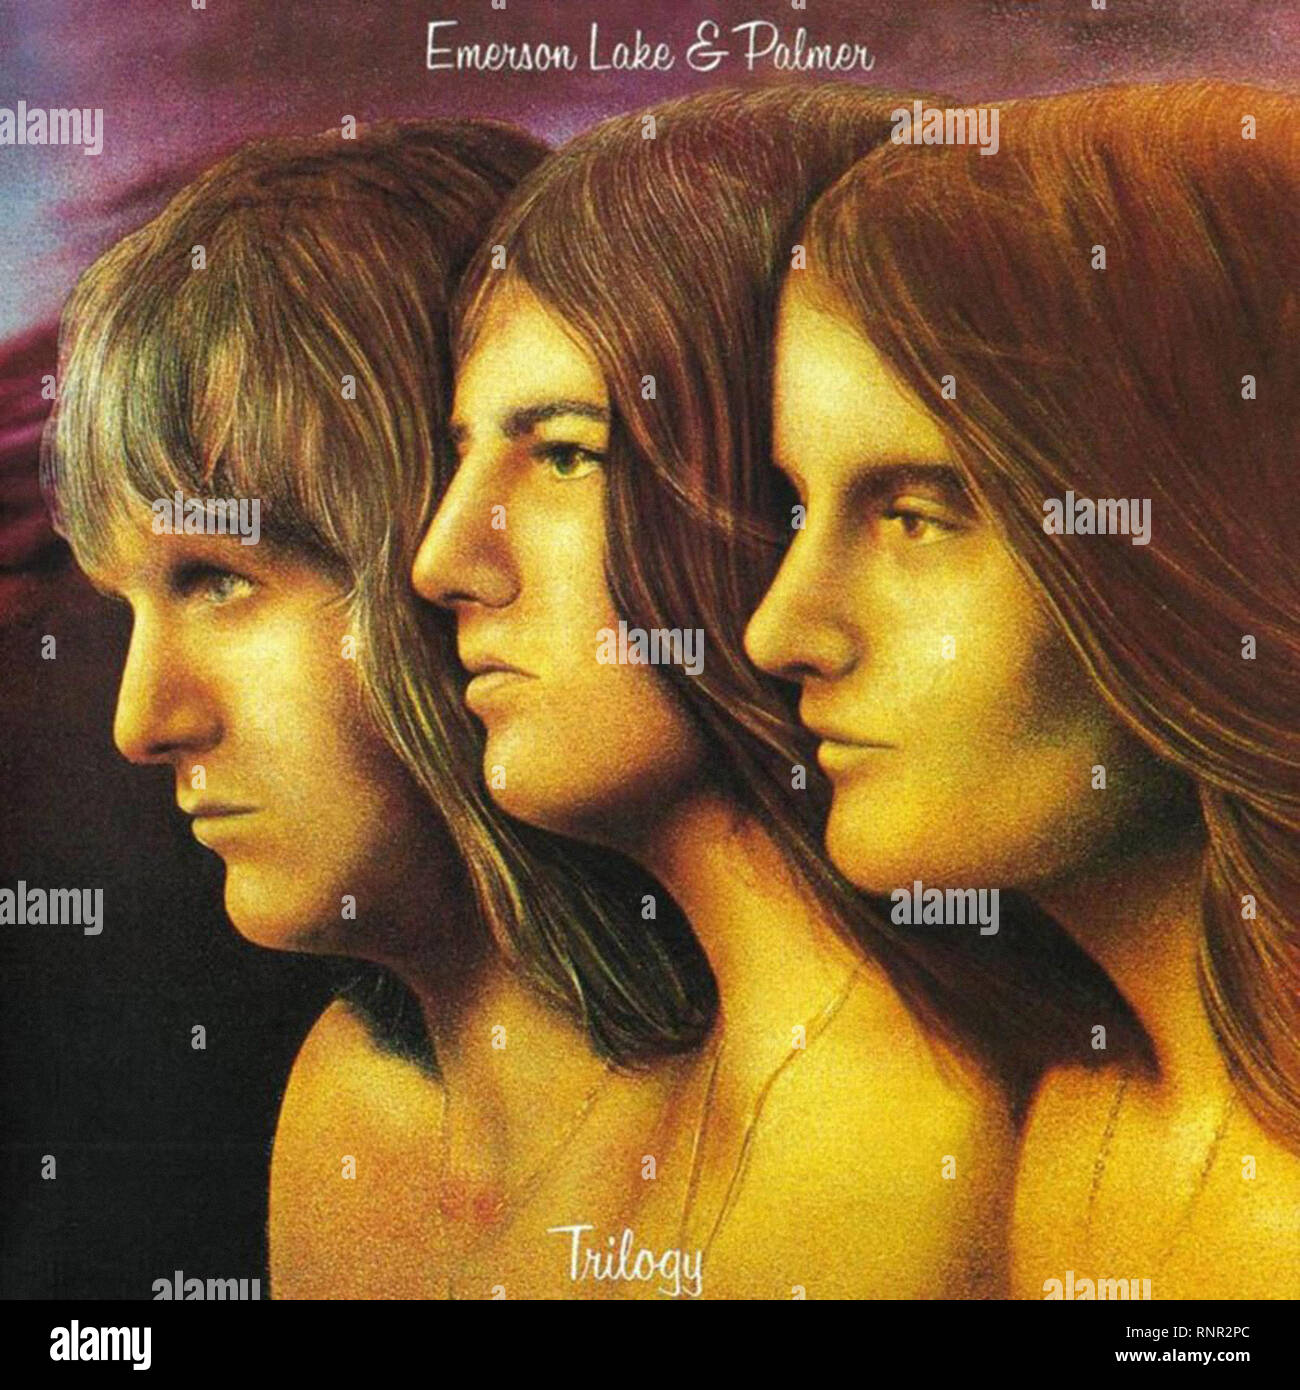 Emerson, Lake and Palmer - Trilogy - Vintage Cover Album Stock Photo - Alamy